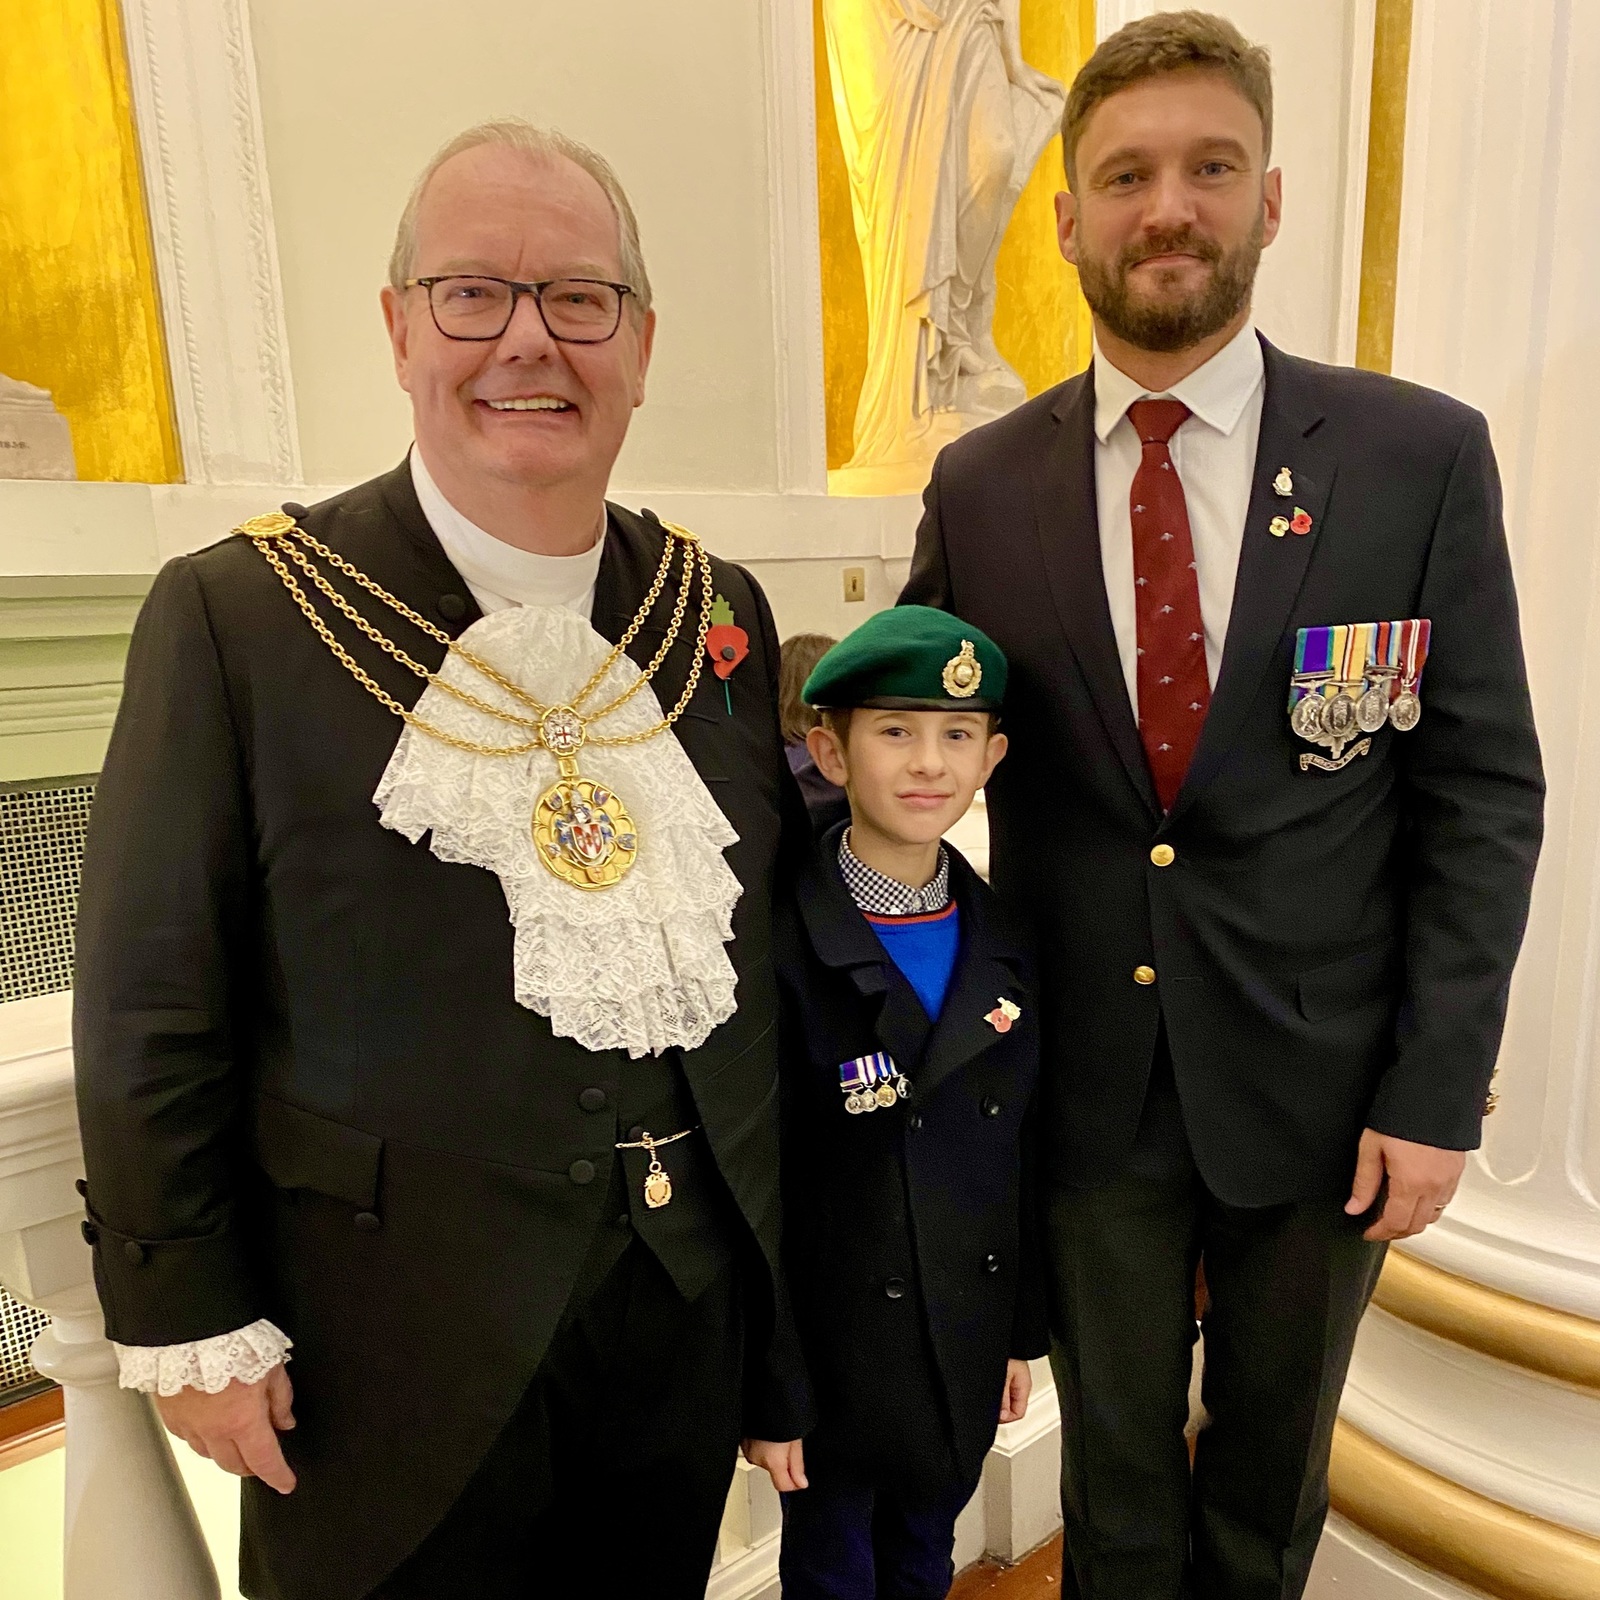 13 Nov 22 - With young master Eliot White wearing his grandad’s Green beret and medals, and his proud dad Andrew, a Para, on Remembrance Sunday